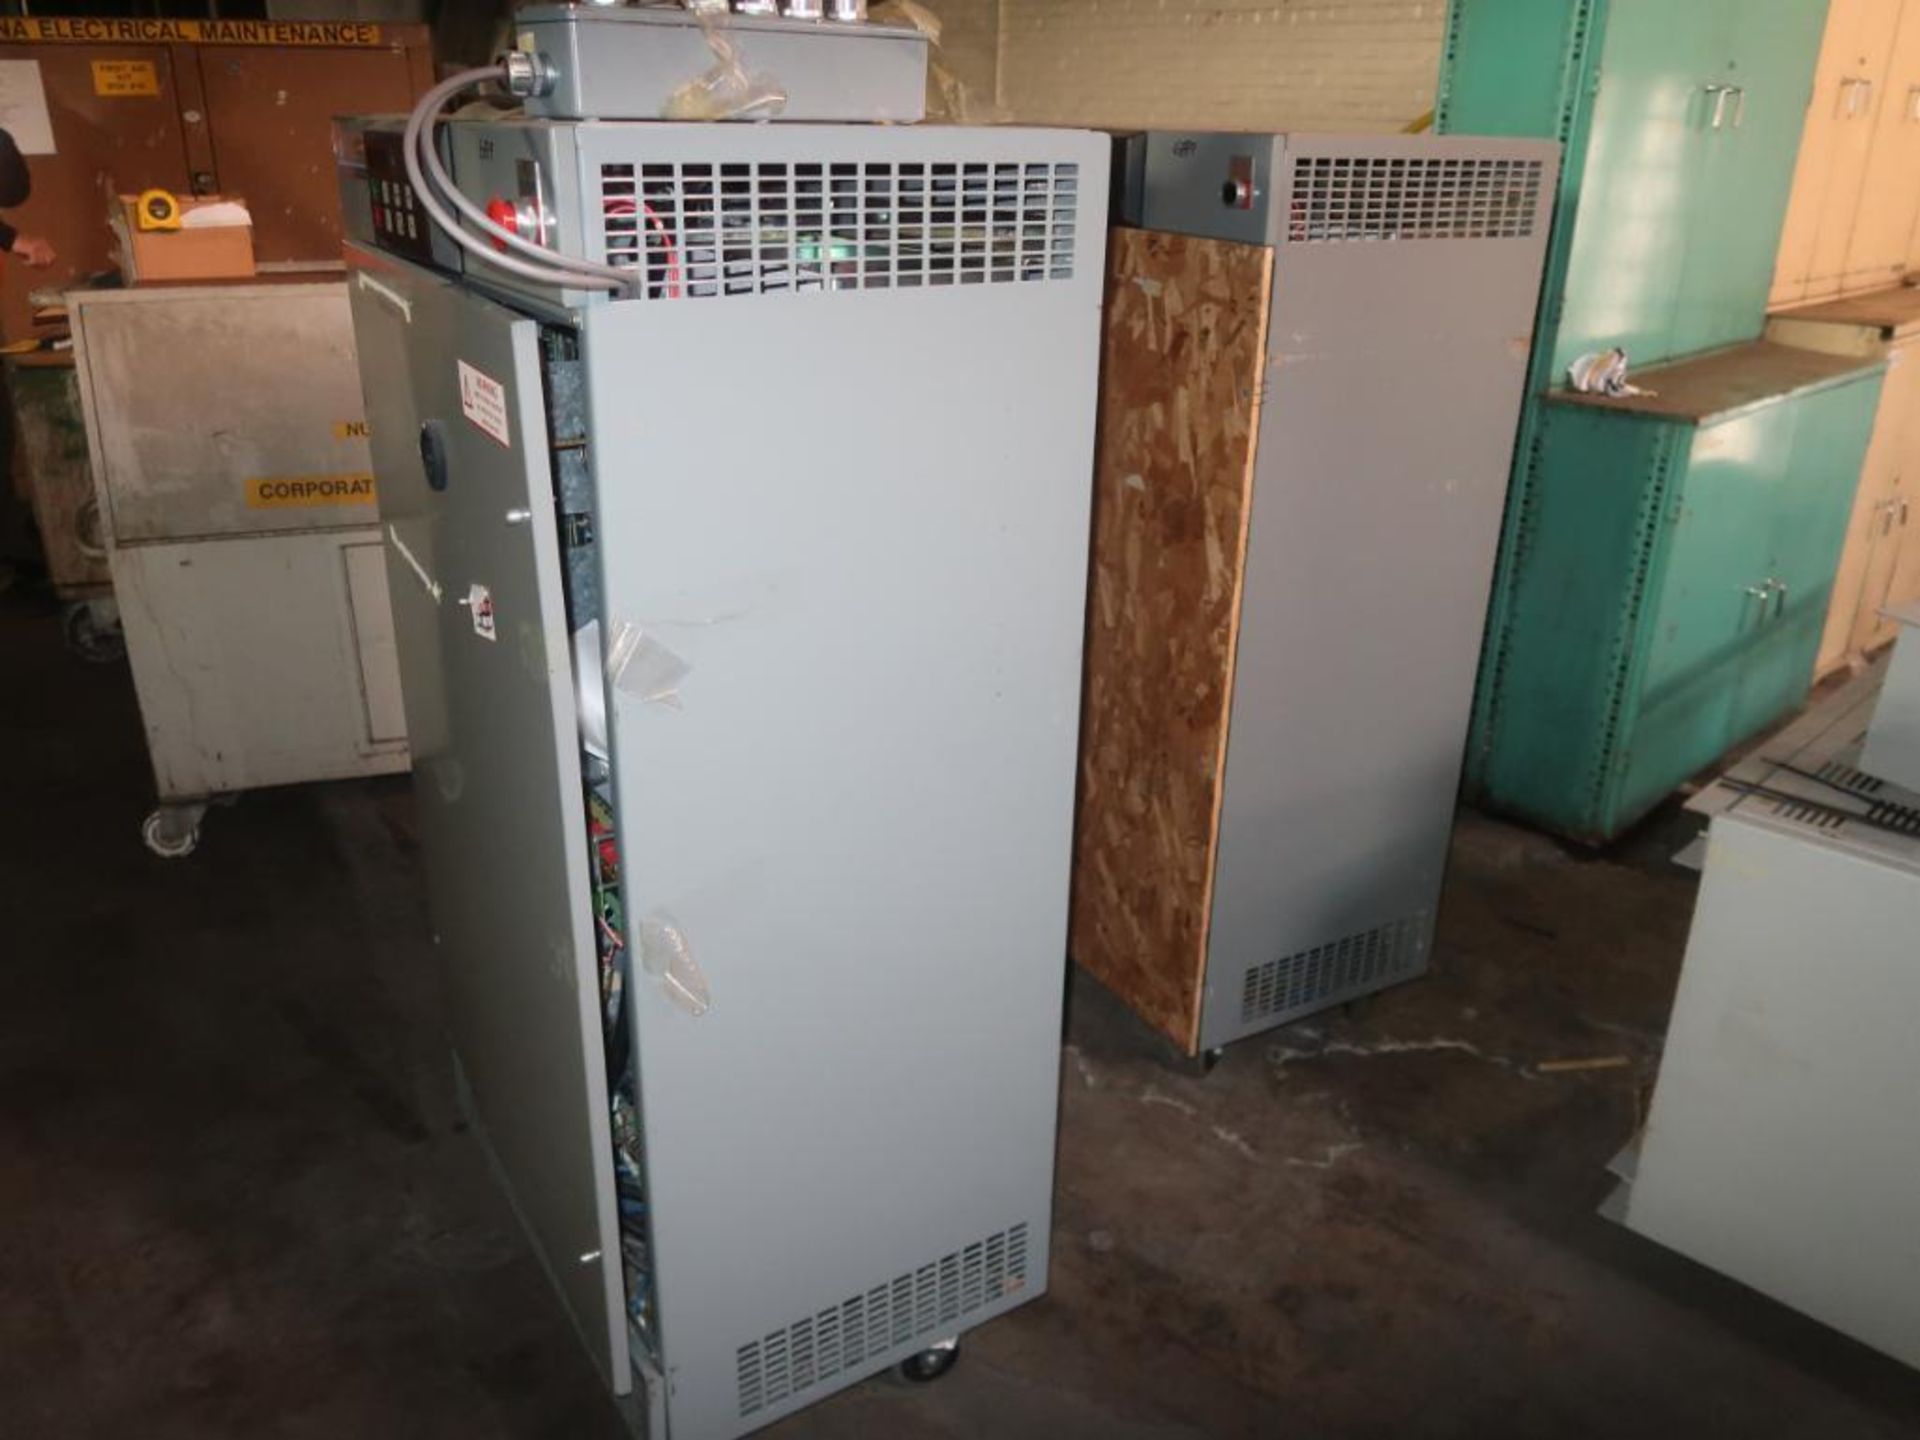 Electrical Cabinets